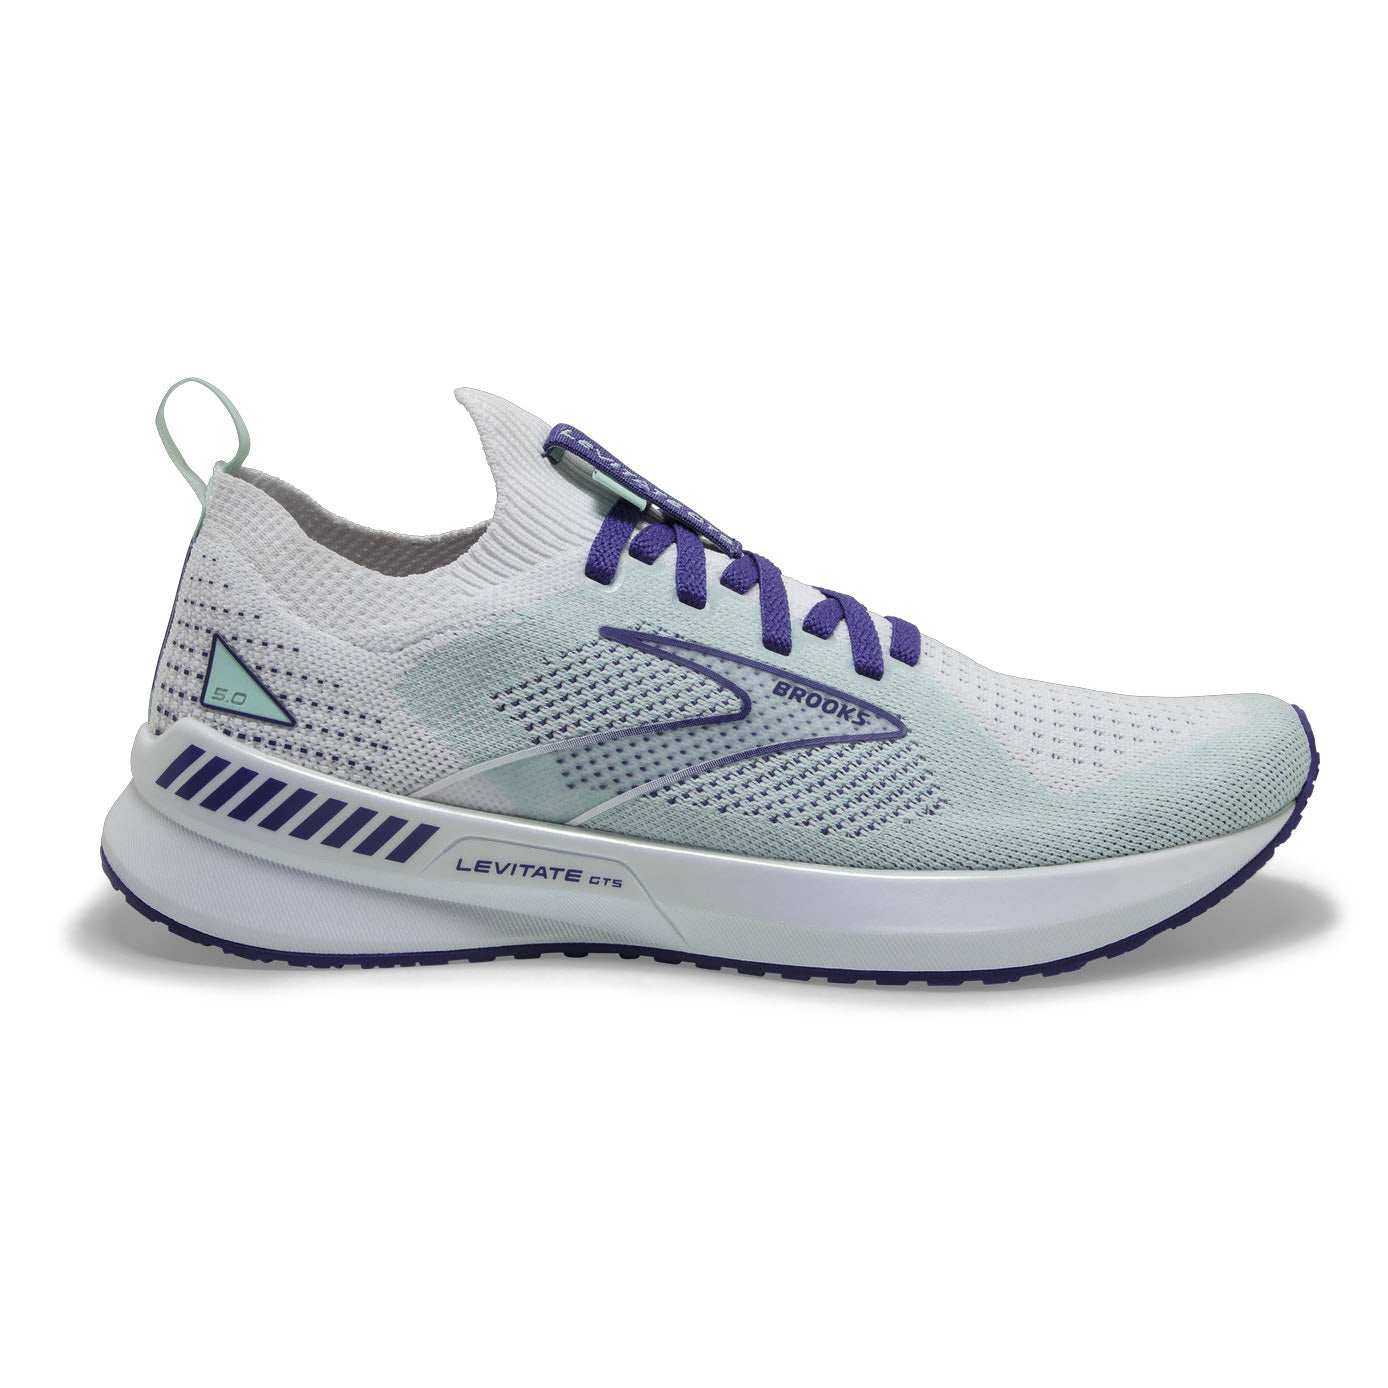 A single Brooks Levitate Stealthfit GTS 5 White/Navy running shoe with purple laces on a white background.